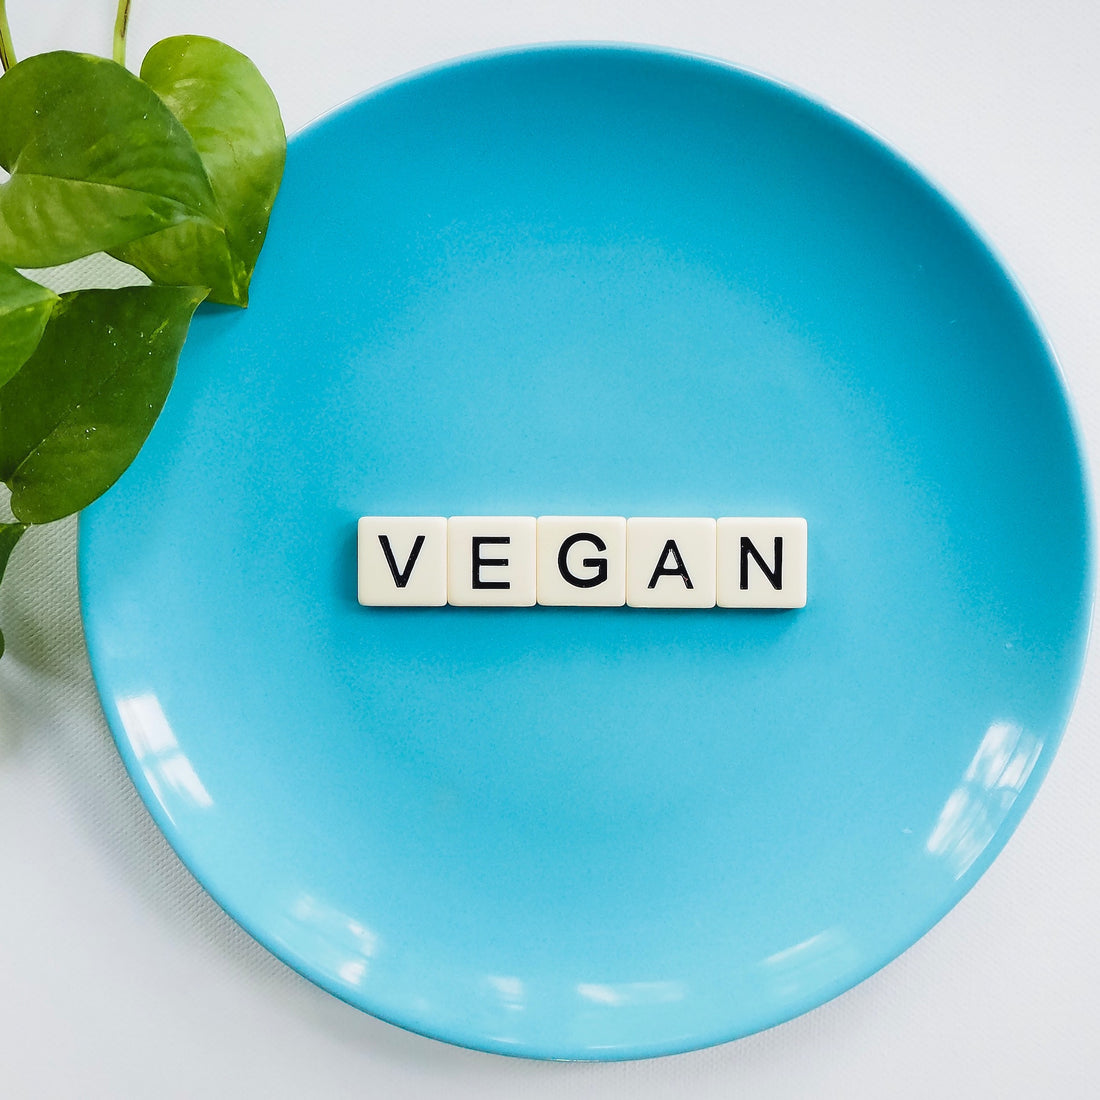 Are Vegans at Risk of Missing Out on Key Nutrients?